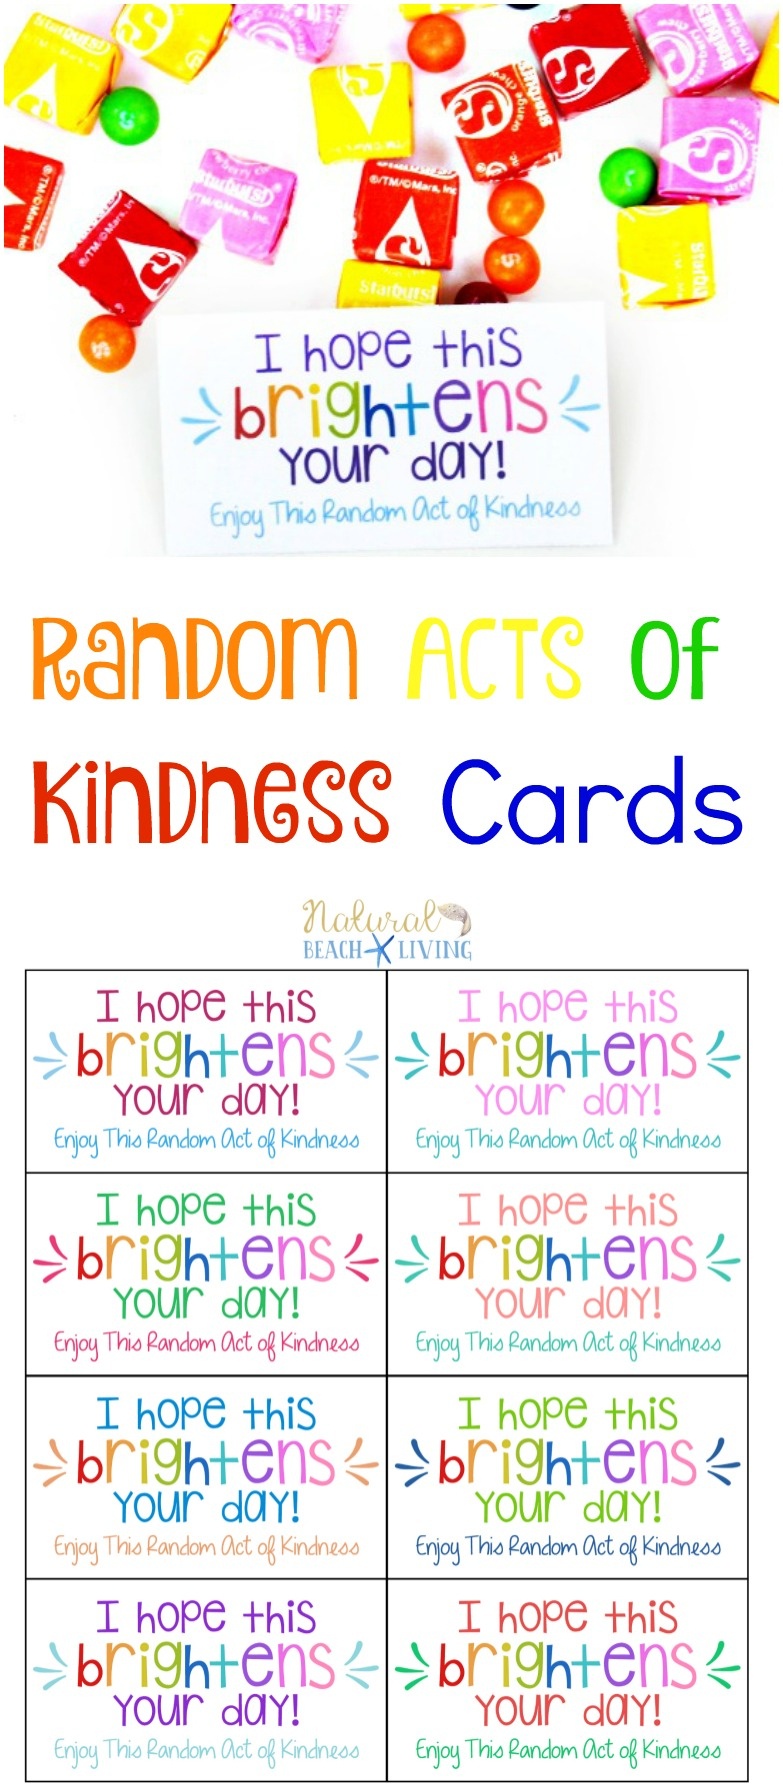 The Best Random Acts Of Kindness Printable Cards Free - Natural - Kindness Cards Printable Free